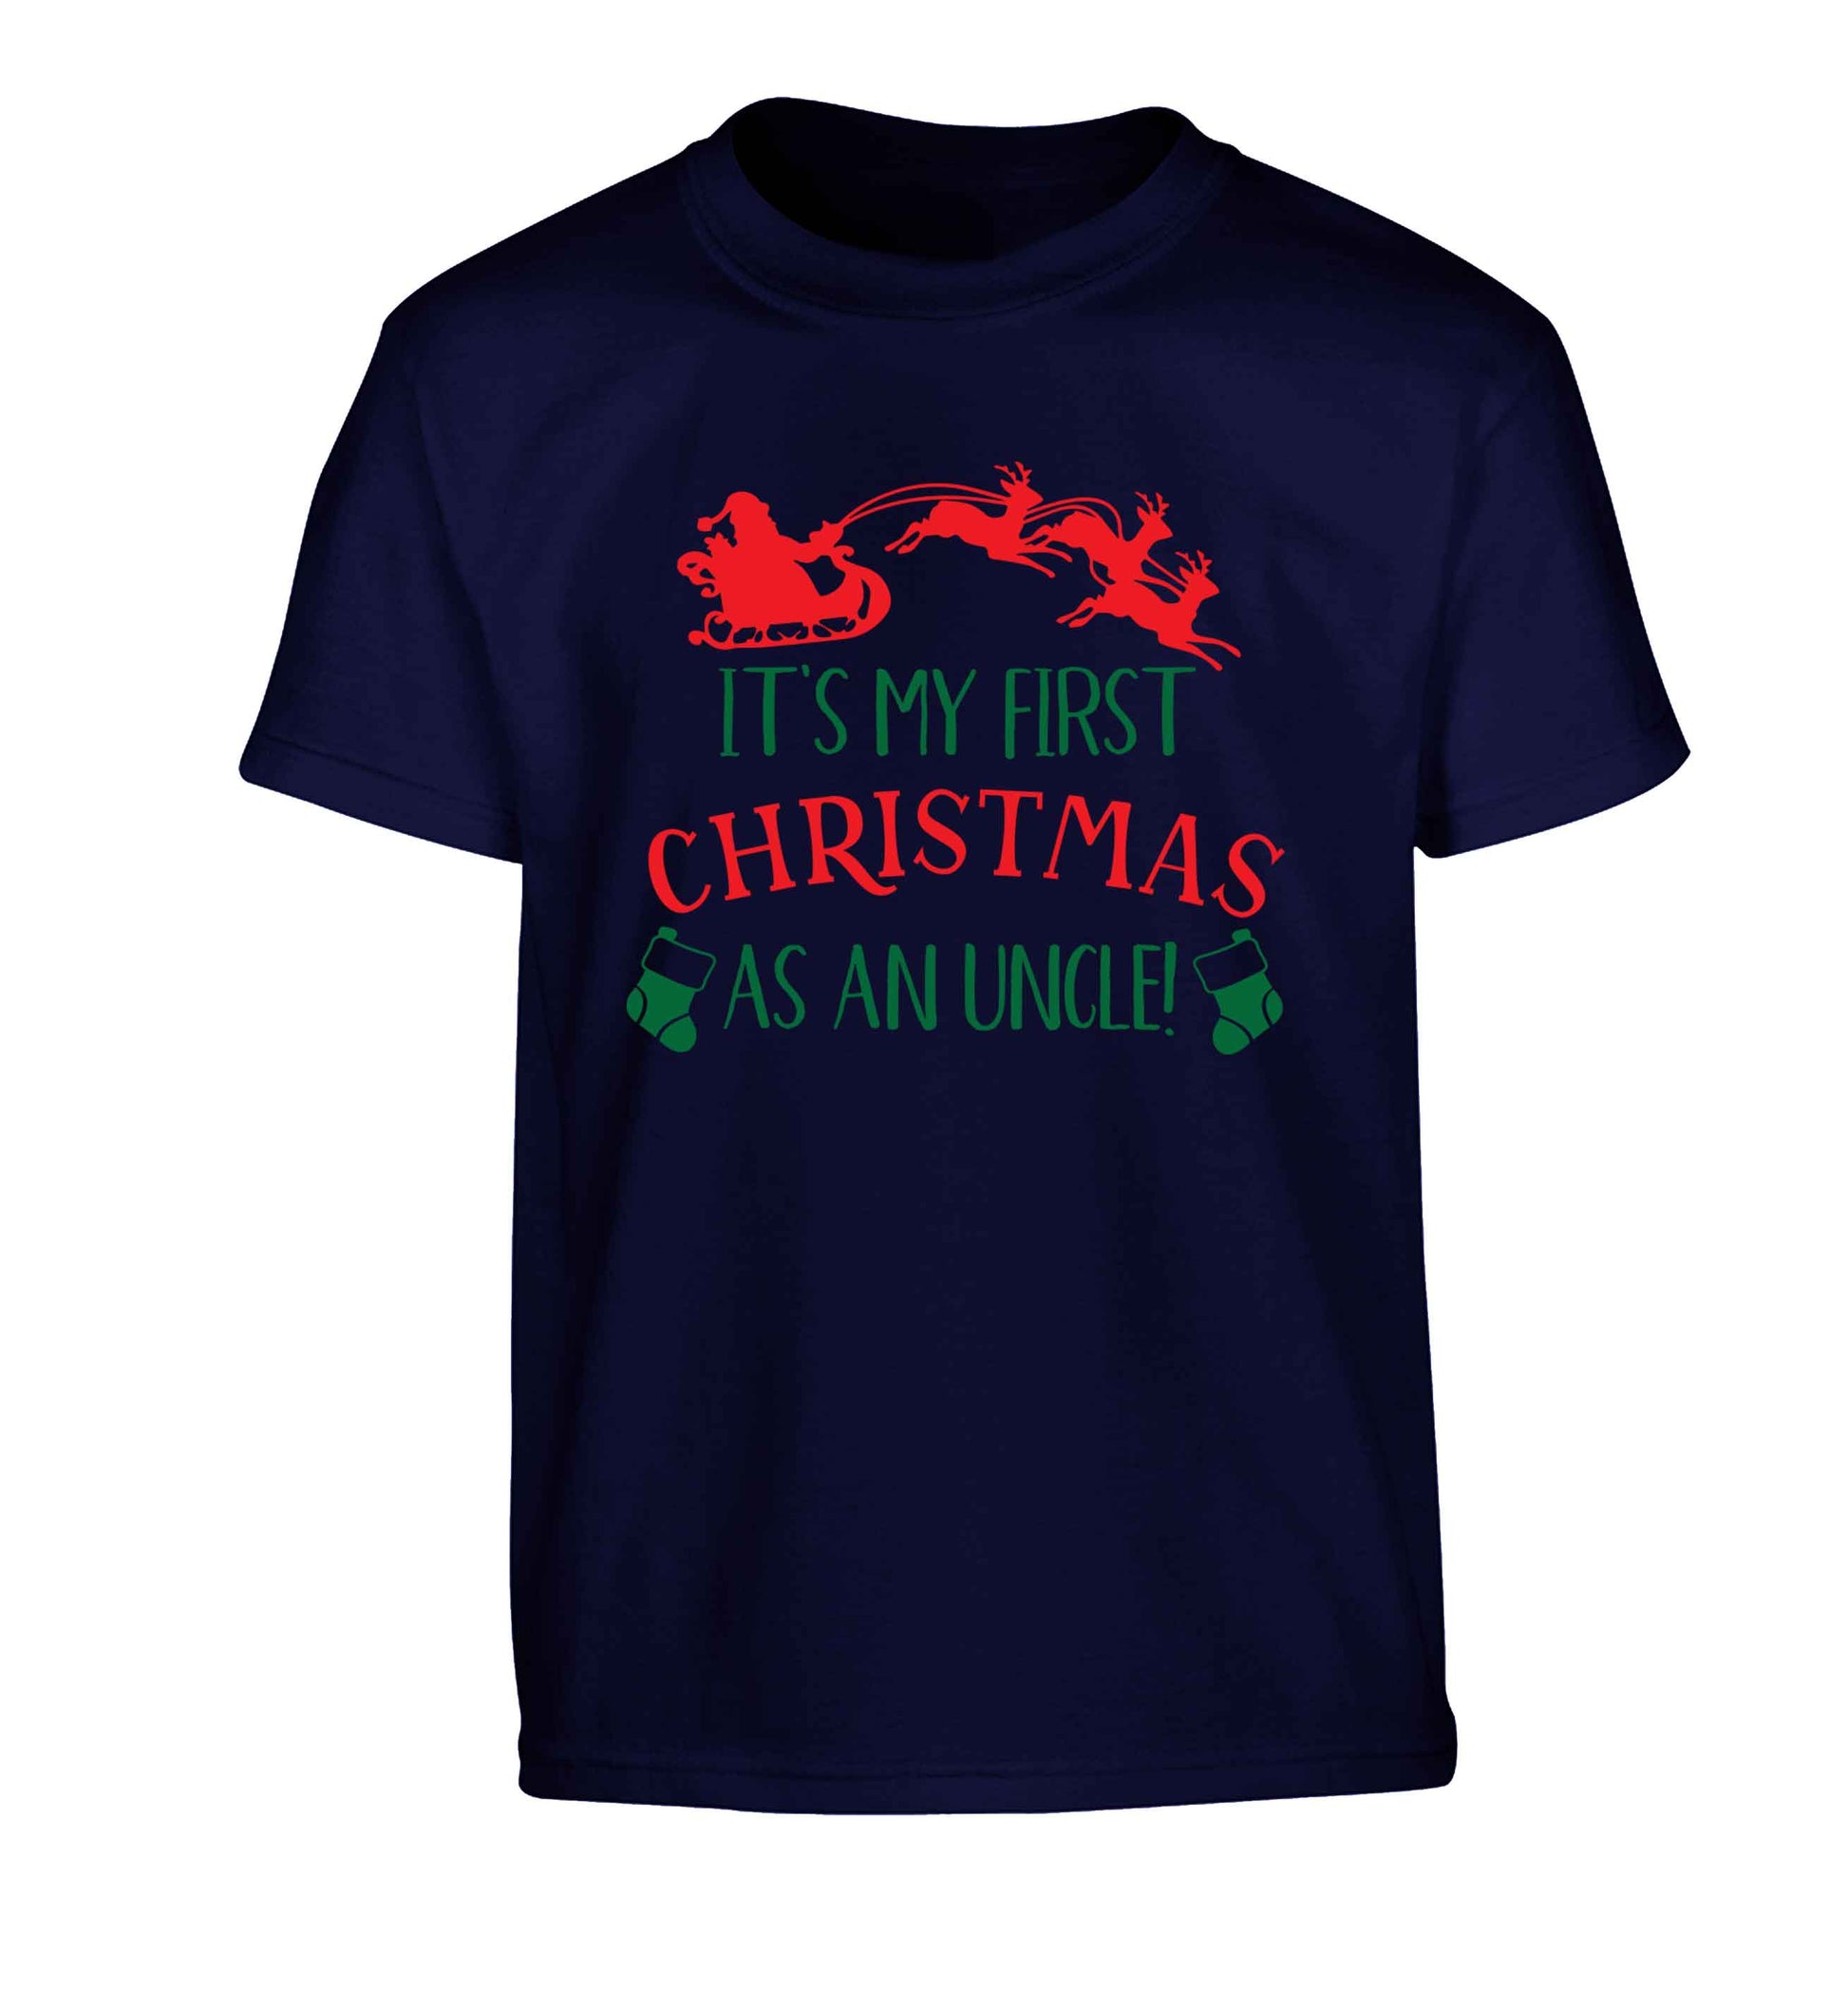 It's my first Christmas as an uncle! Children's navy Tshirt 12-13 Years